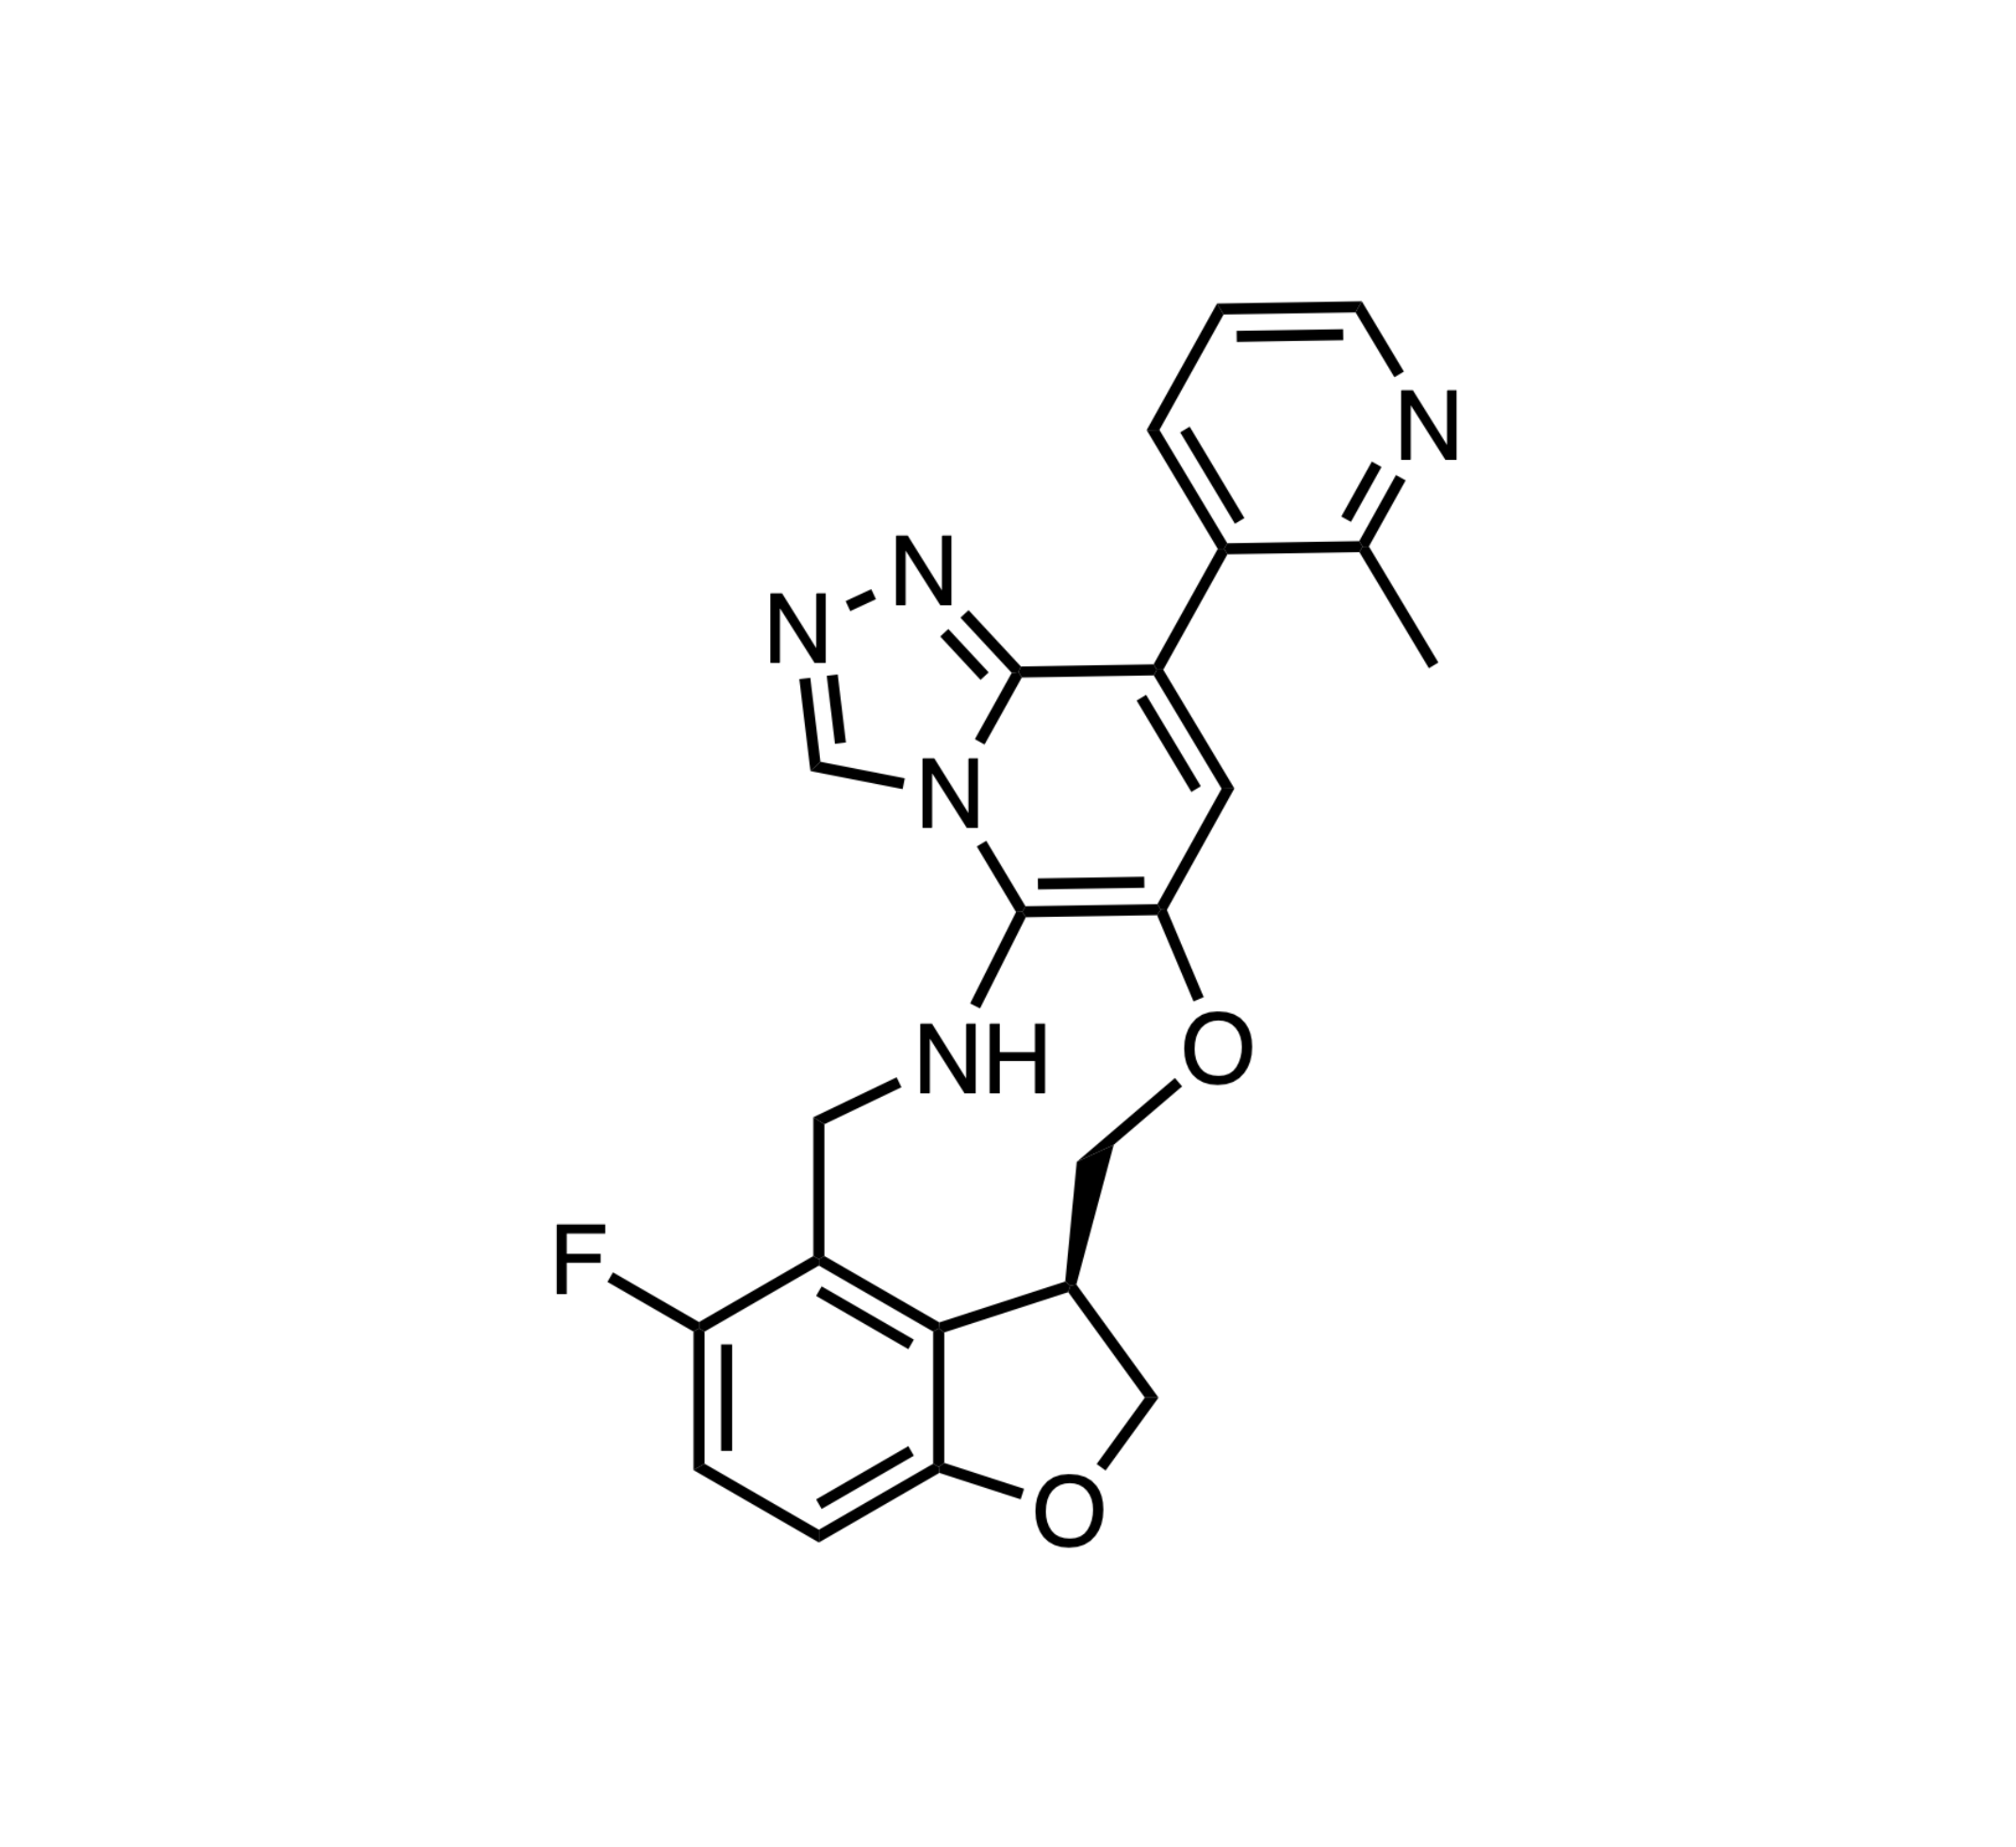 pociredir, oral, allosteric PRC2 inhibitor (EED), Ph. IIb for sickle cell disease (on hold), FULCRUM THERAPEUTICS||||